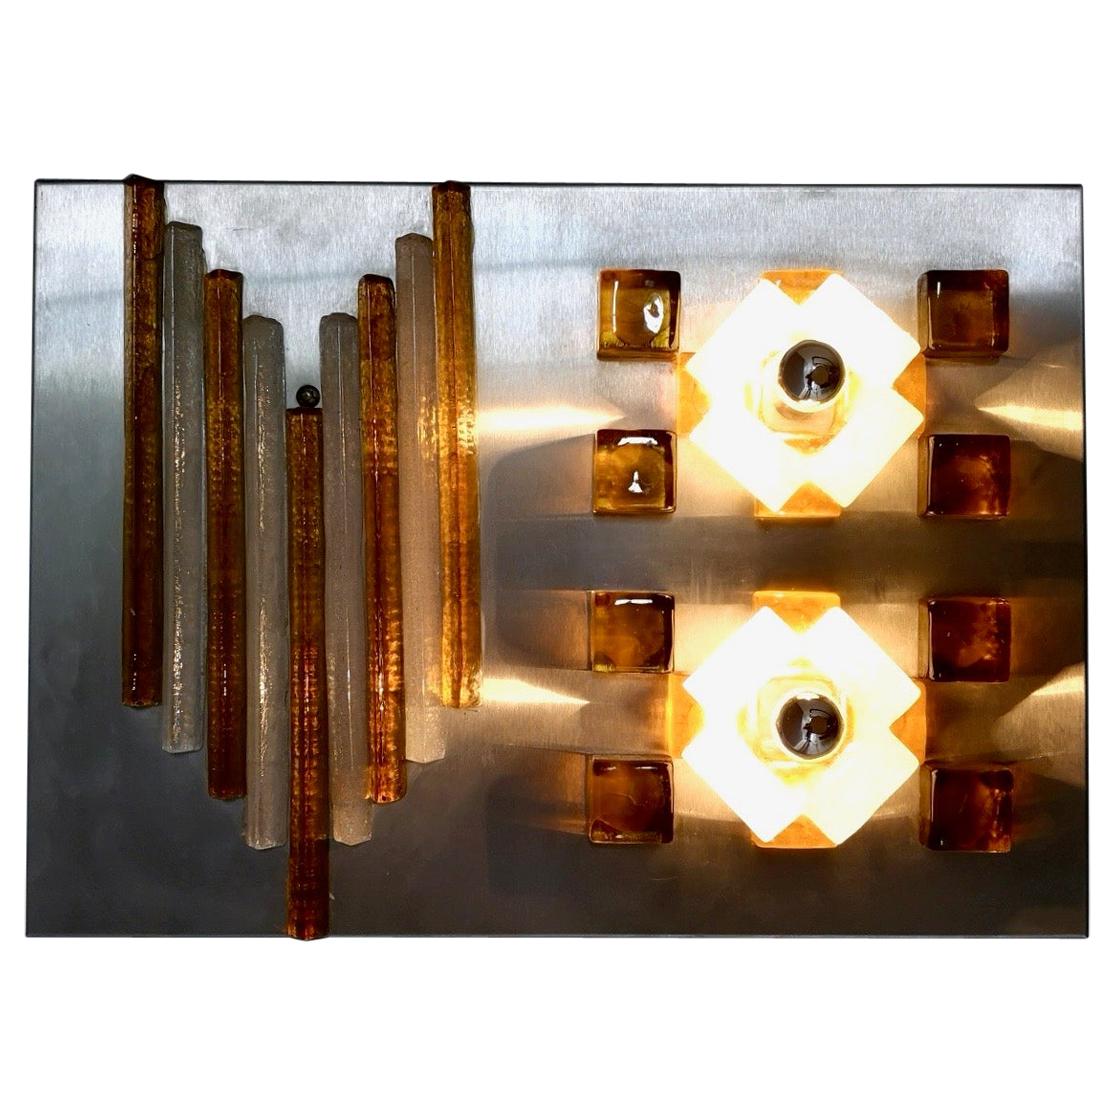 This wall light is made in Murano glass and glazed steel.
It might show slight traces of use since its vintage, but its wiring is new and it can be considered as in excellent original condition and ready to give ambiance to any room.

Measures: